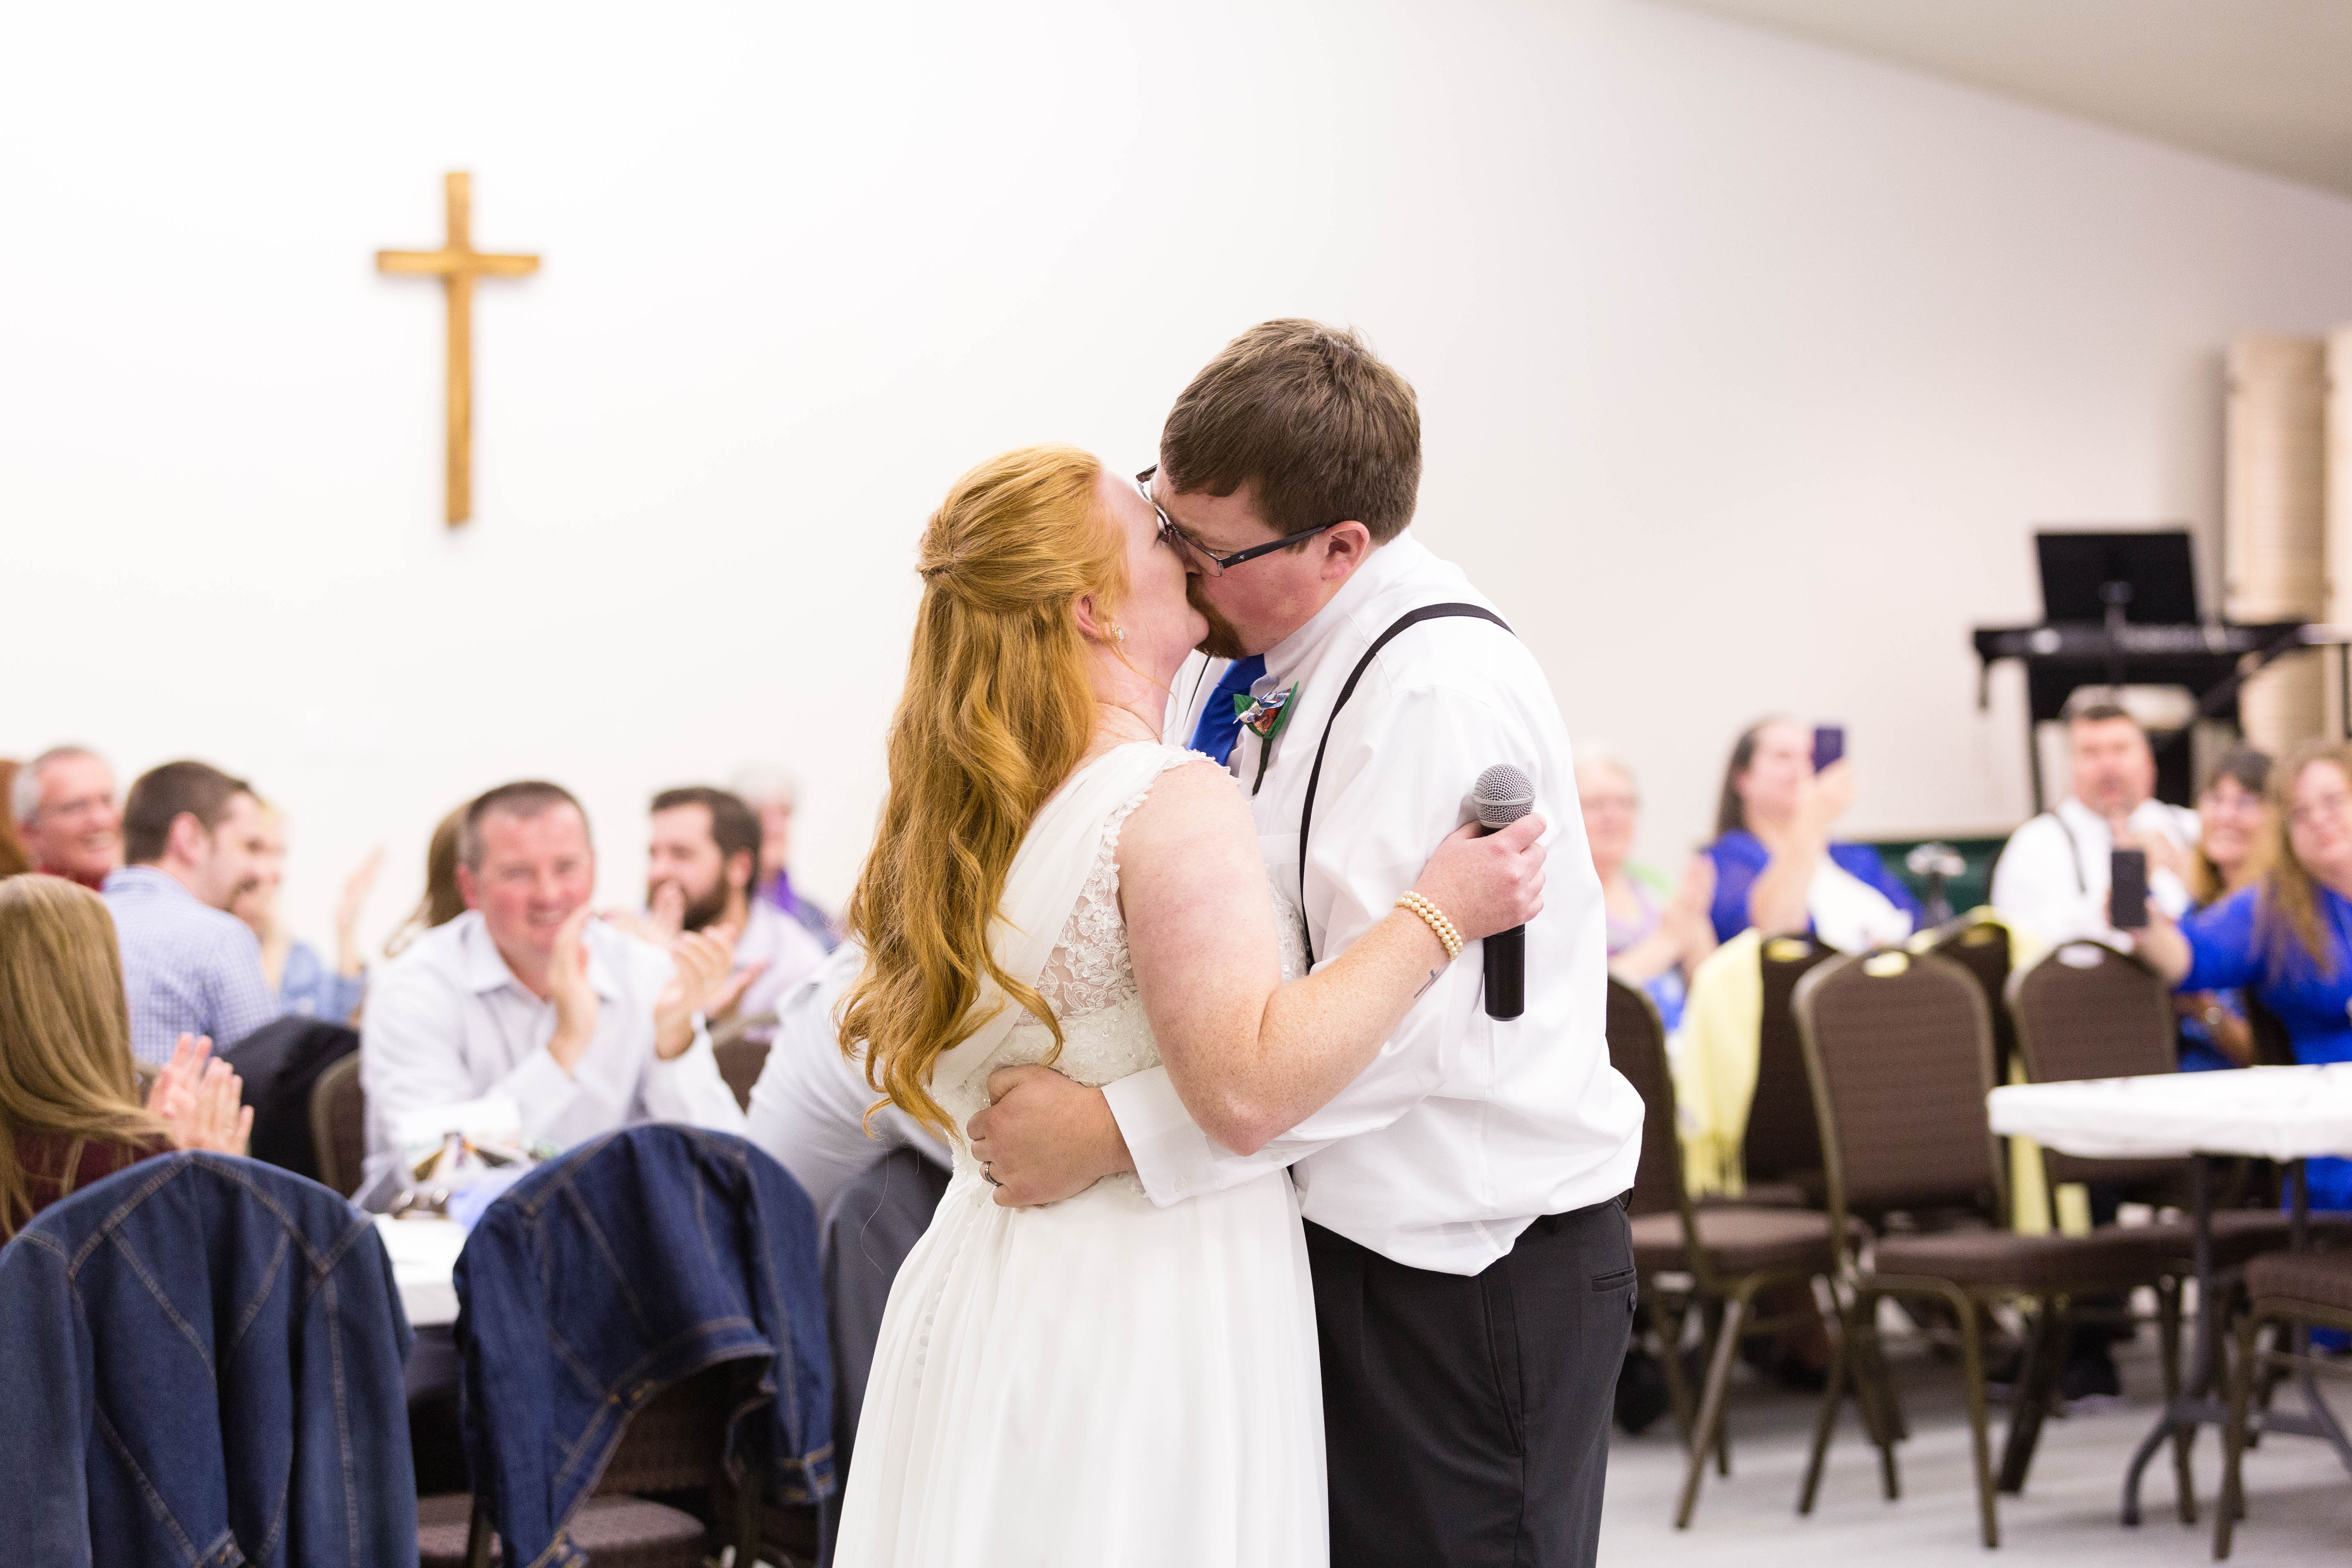 bride and groom kiss while guests applaud in the background at their reception